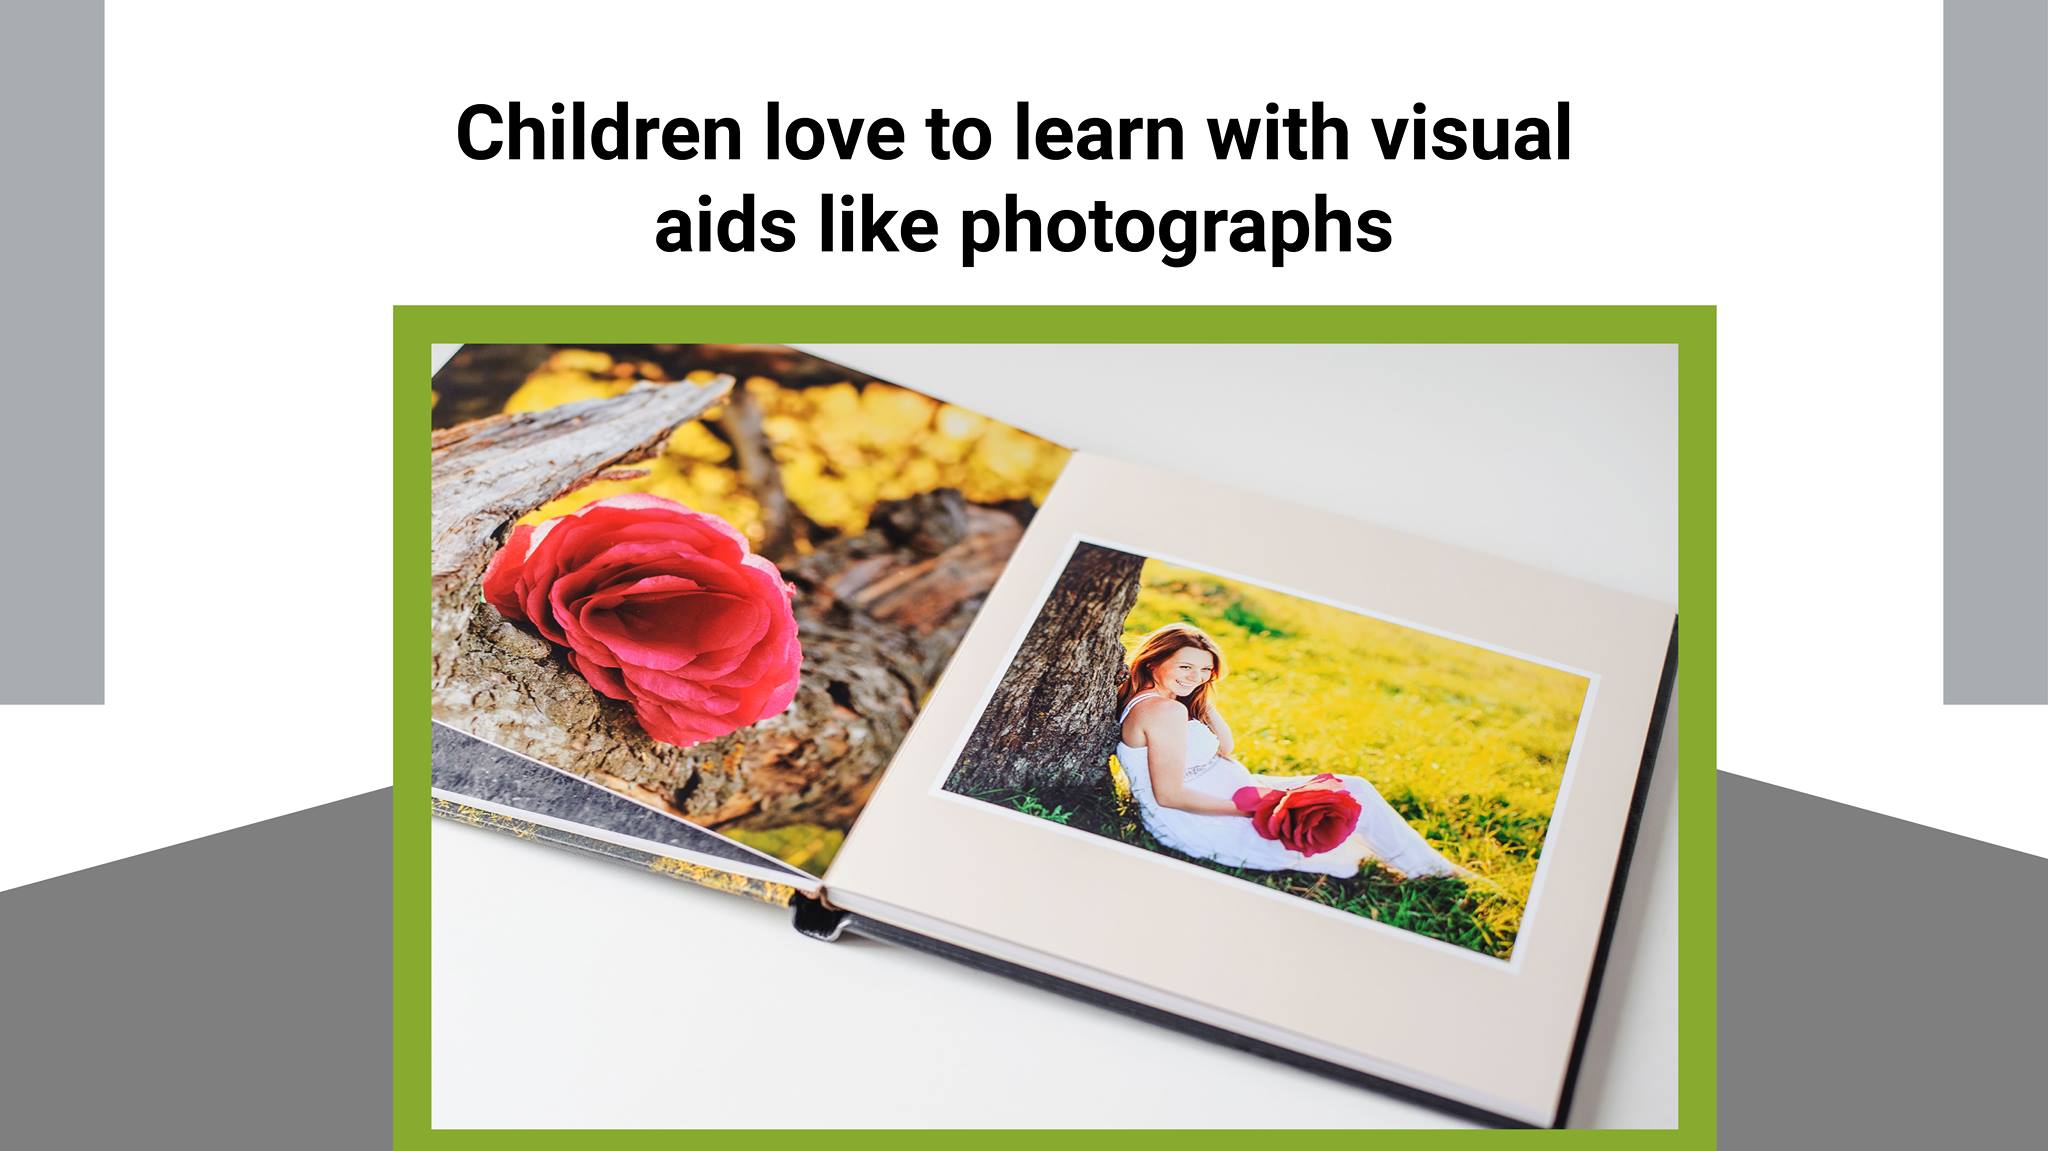 Children love to learn with visual aids like photographs